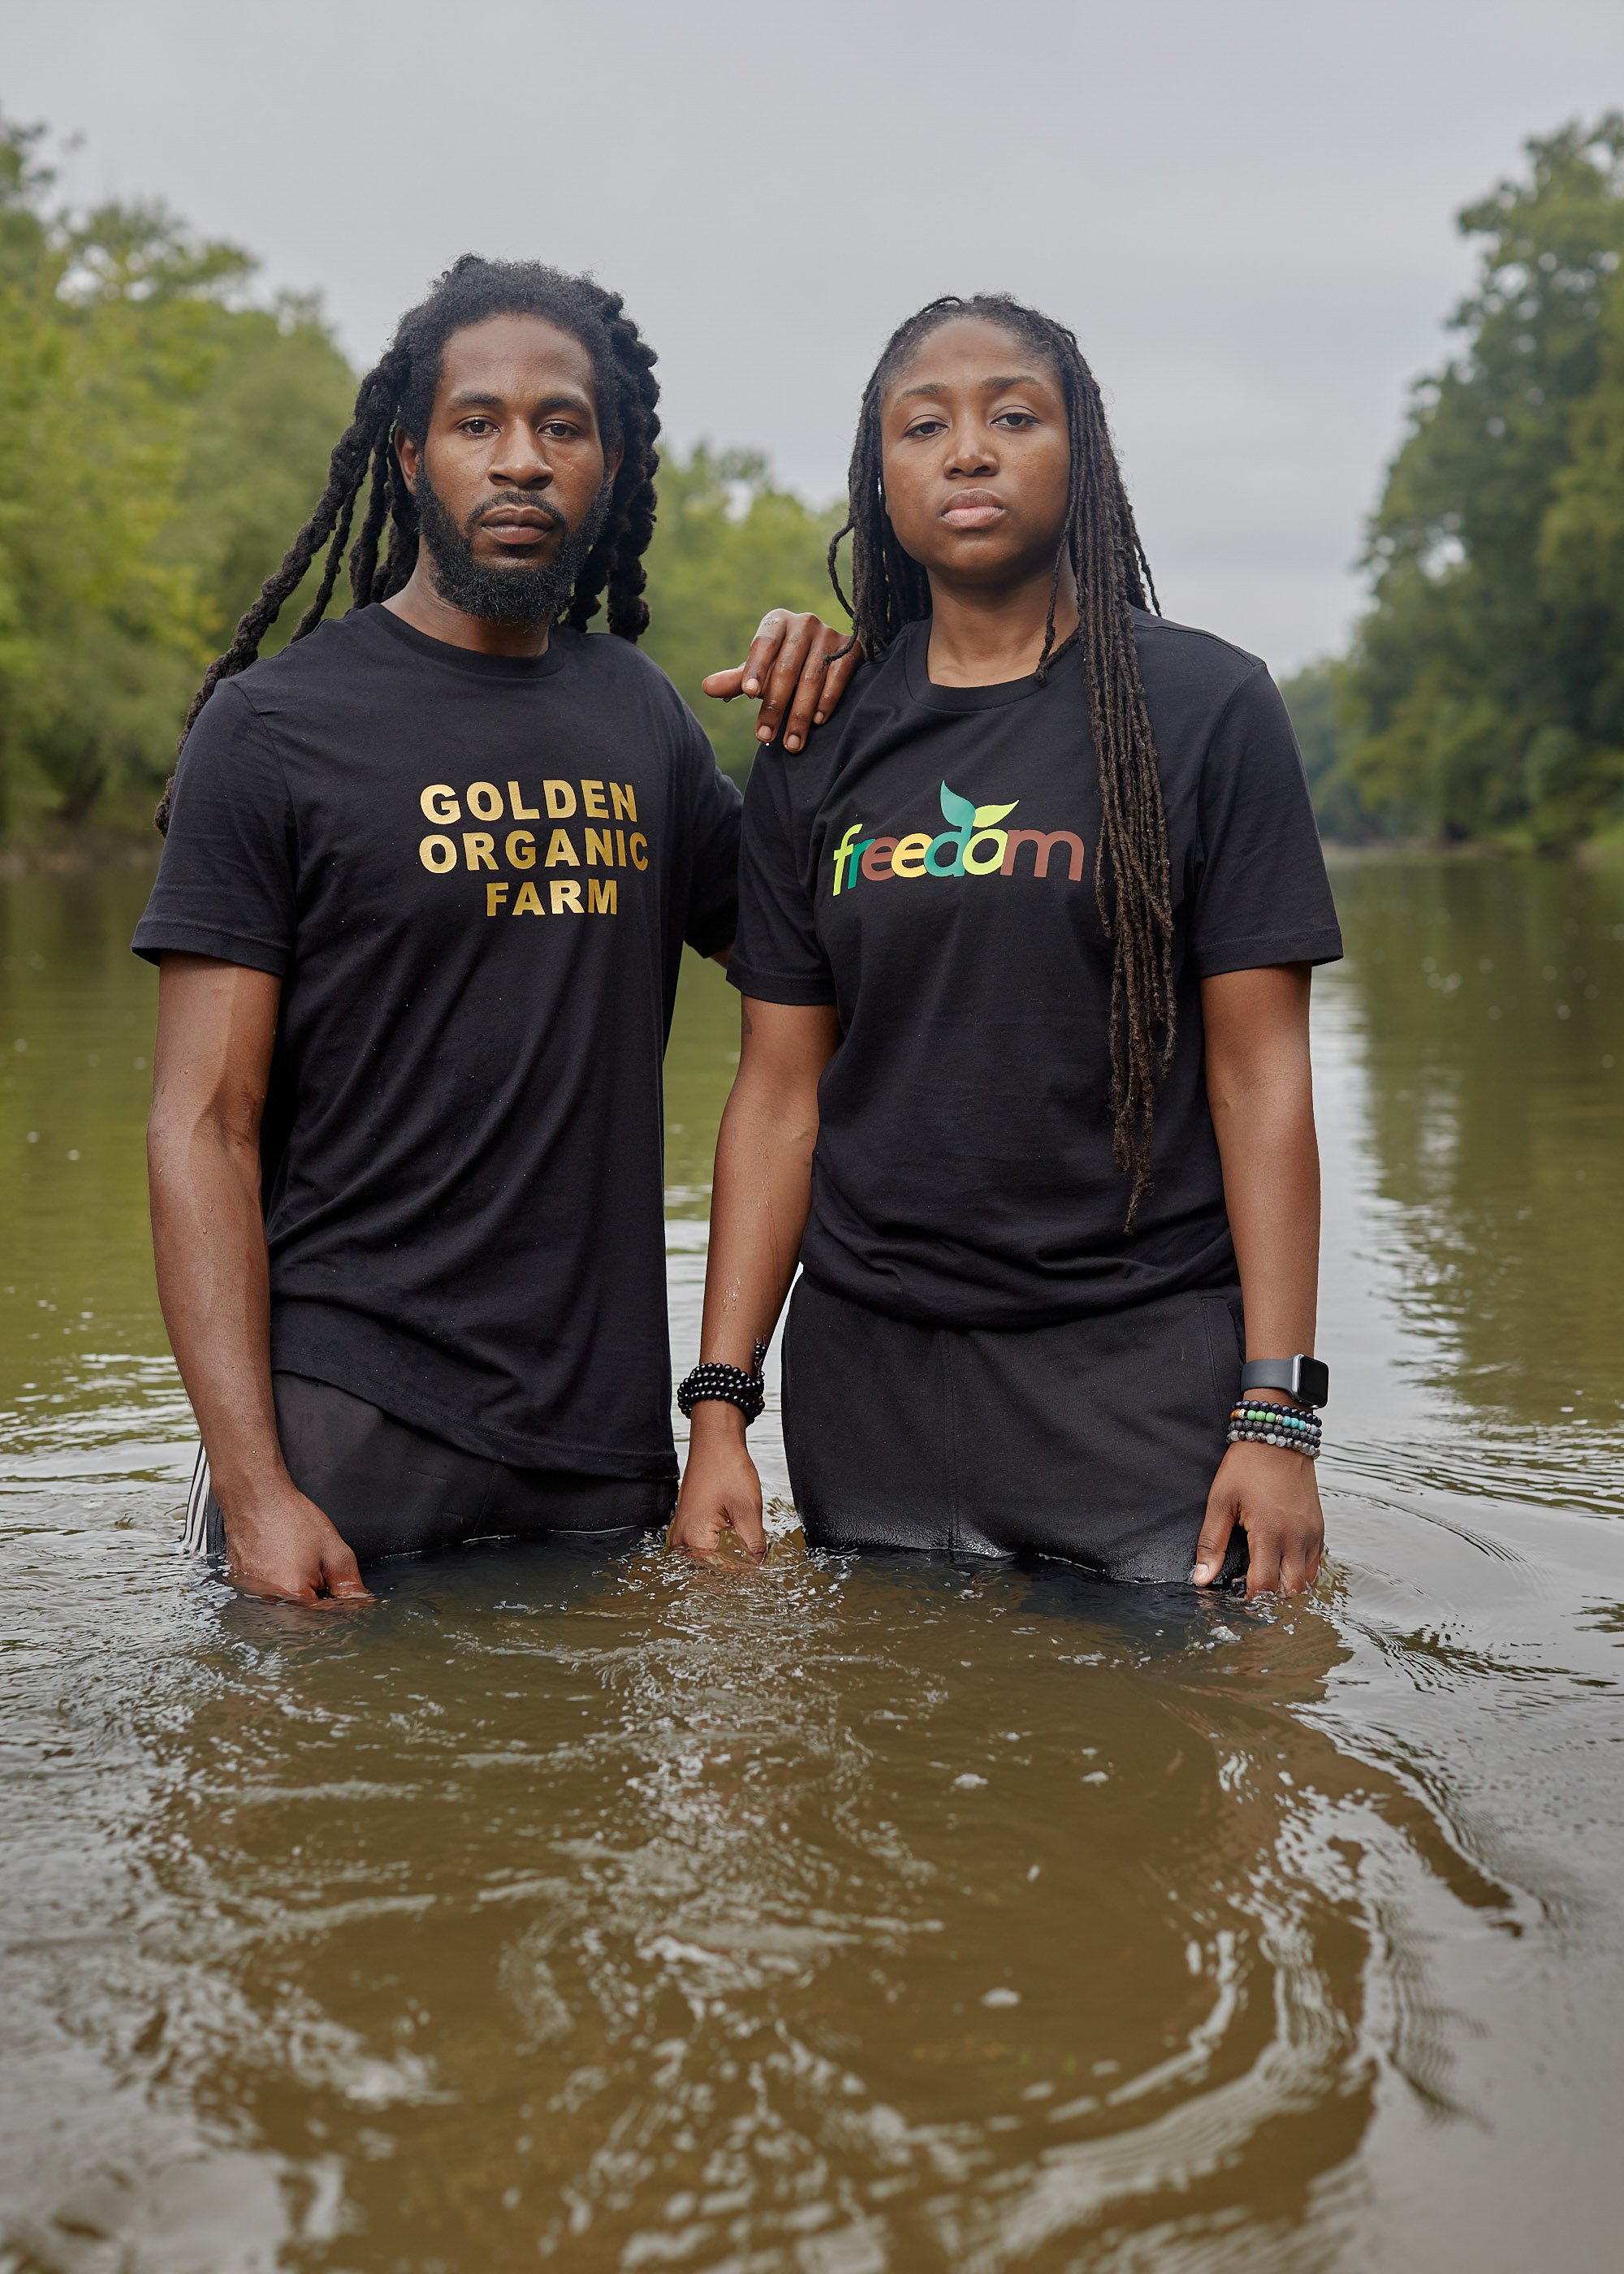  Kendrick Ransome and Marquetta Dickens in 2019 in the Tar River at Shiloh Landing, where enslaved Africans were brought ashore to be sold to plantations in Edgecombe County. Dickens and Ransome co-founded Freedom Org, Ransome runs Golden Organic Far